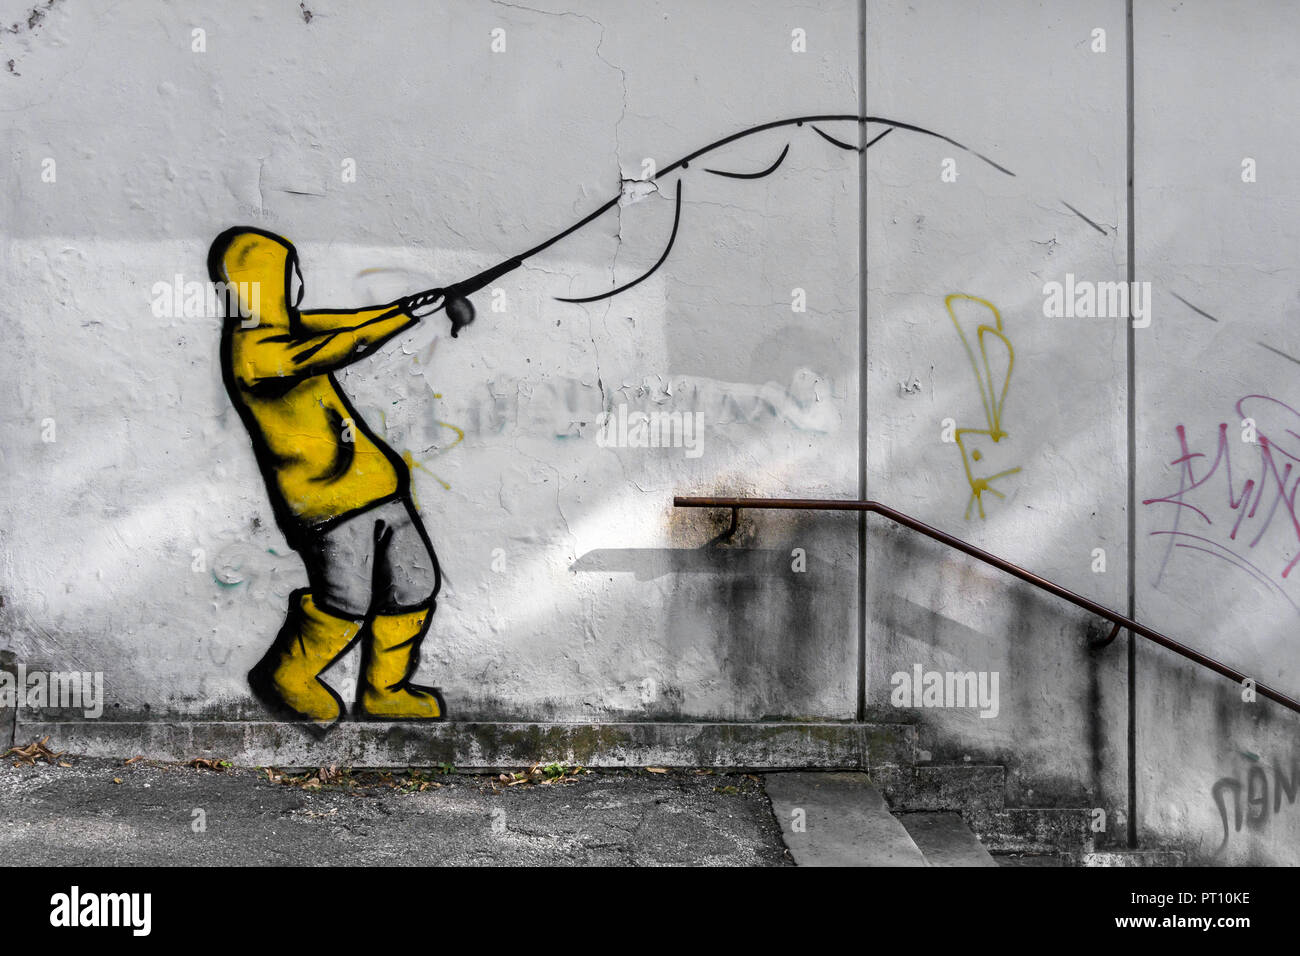 Street art by unknown artist on a concrete wall. The painting represents a boy fishing, suit with raincoat and yellow galoshes. Stock Photo